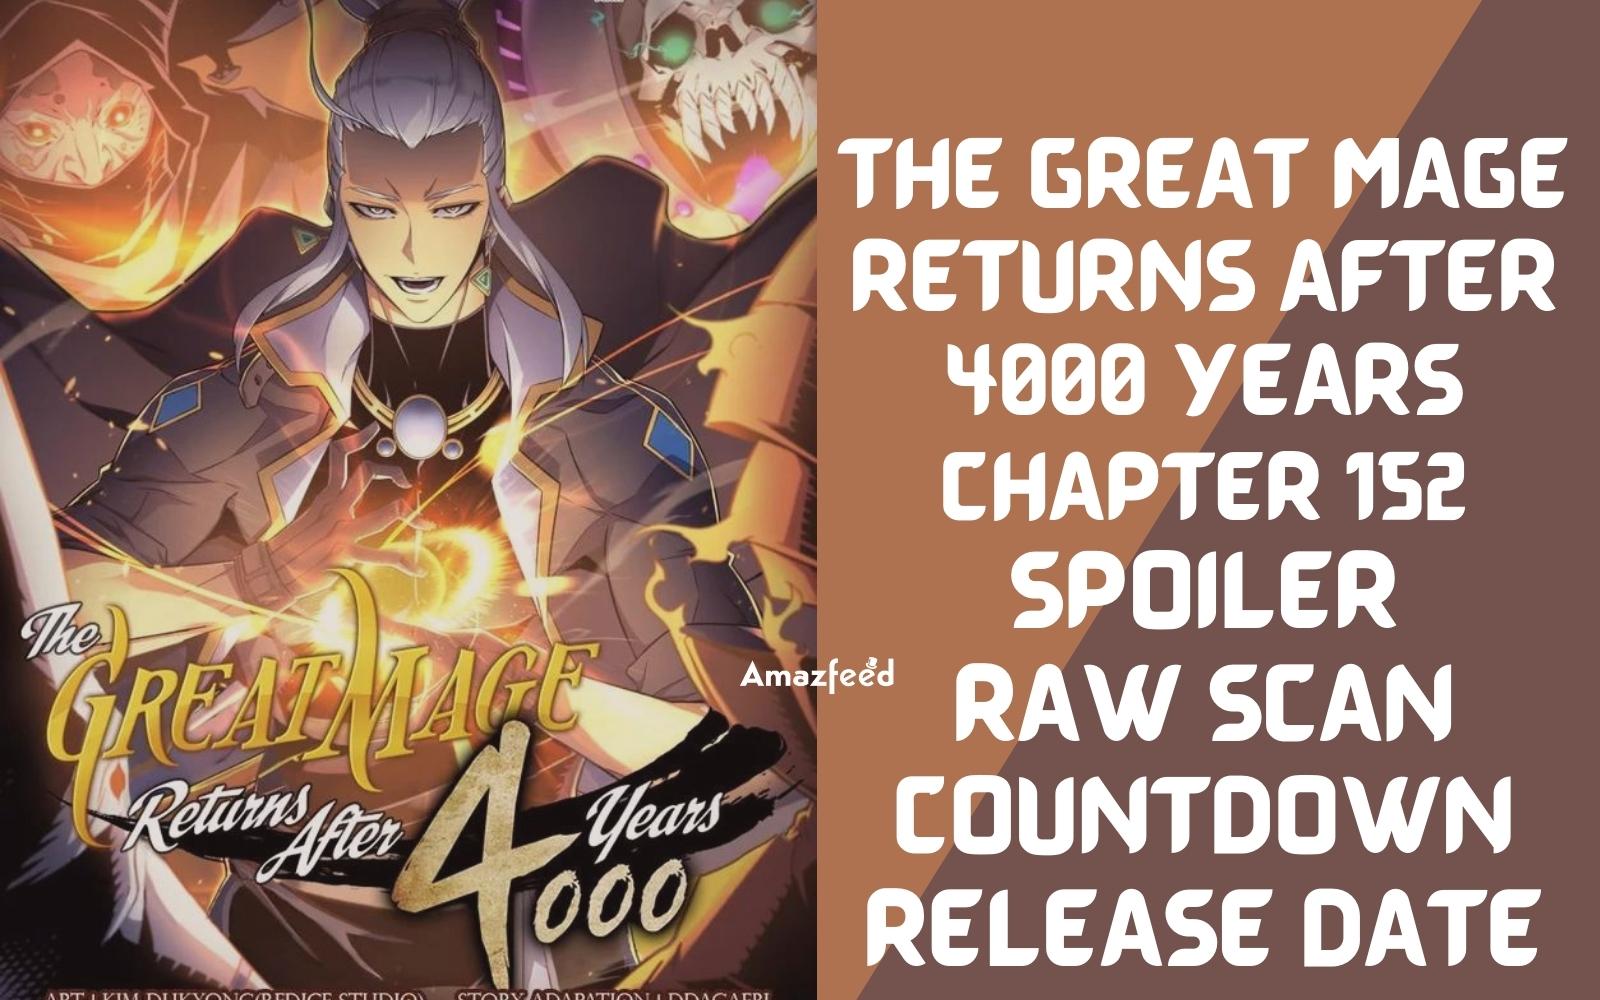 The Great Mage Returns After 4000 Years Chapter 152 Spoiler, Raw Scan, Release Date, Color Page